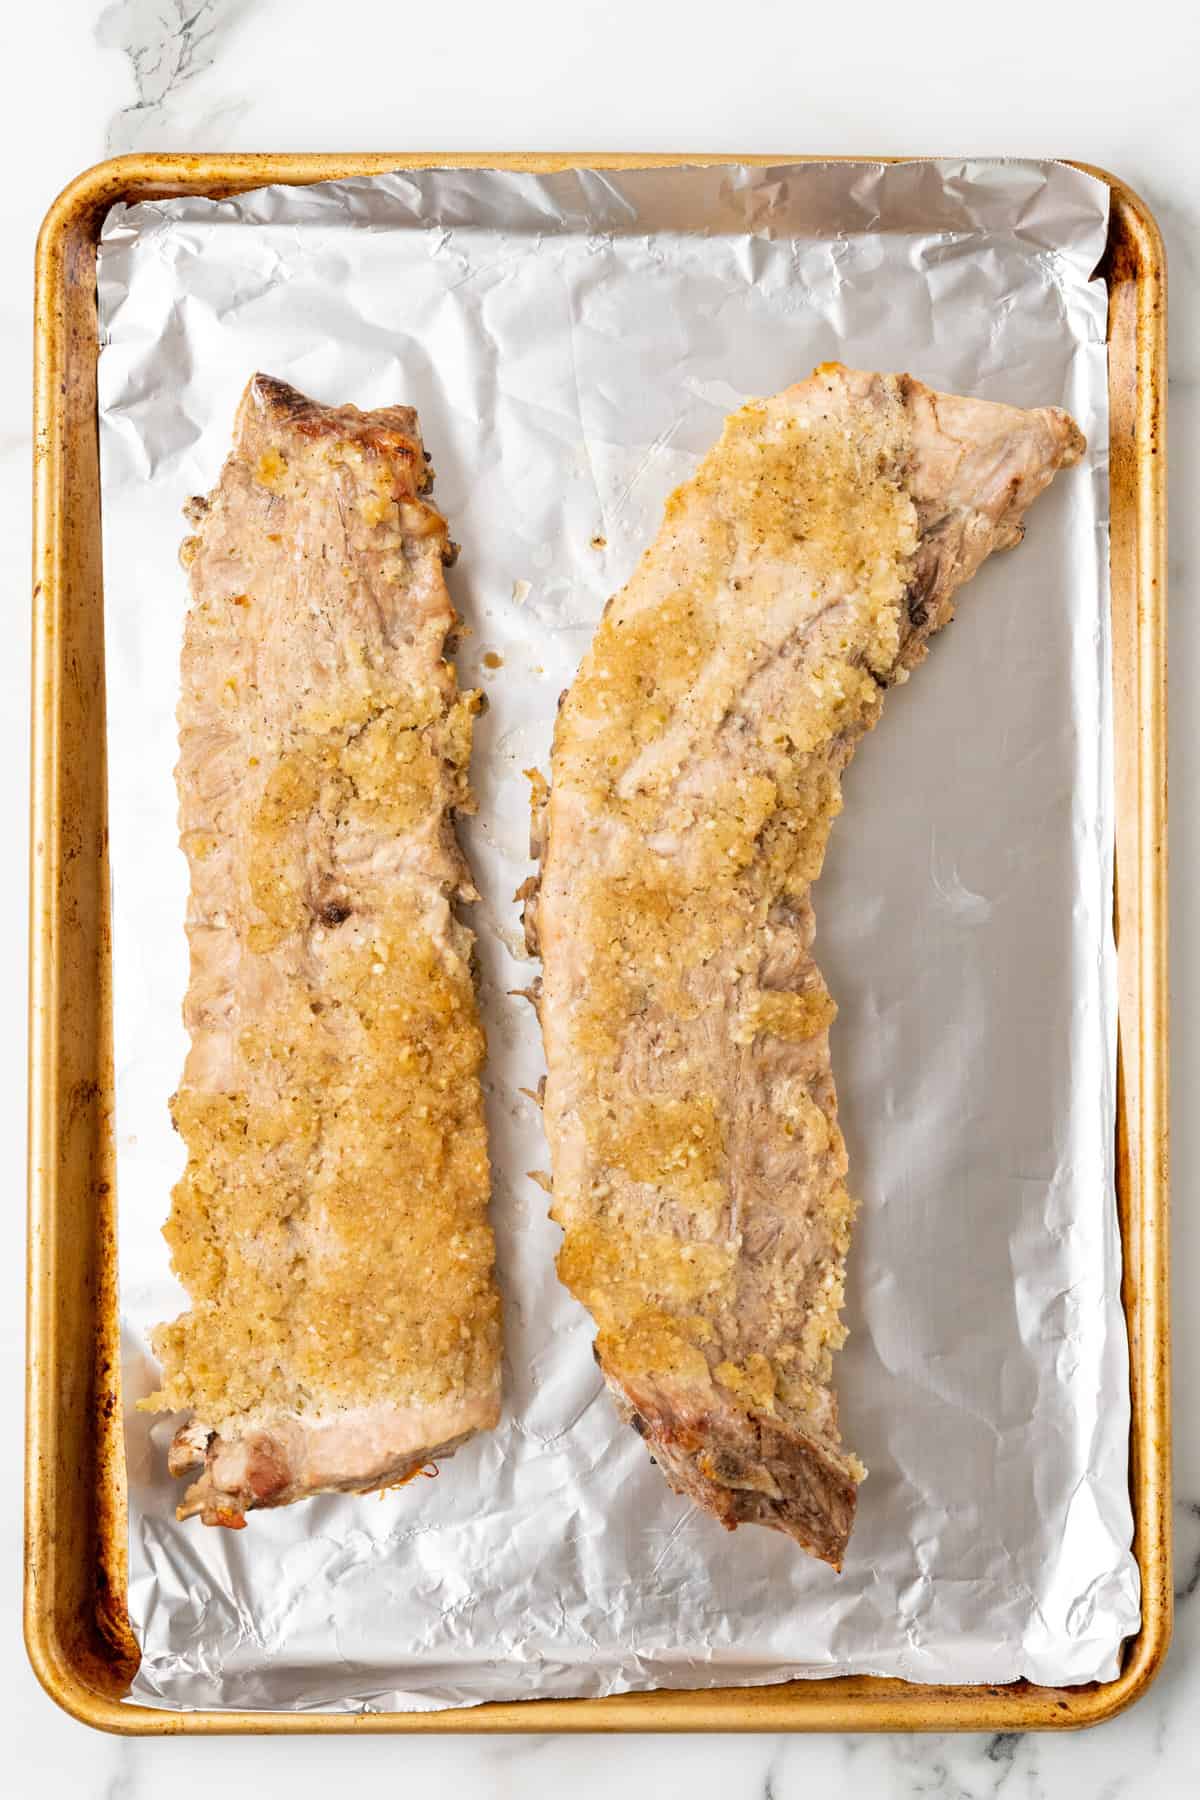 two whole racks of baked pork ribs in  a baking sheet.